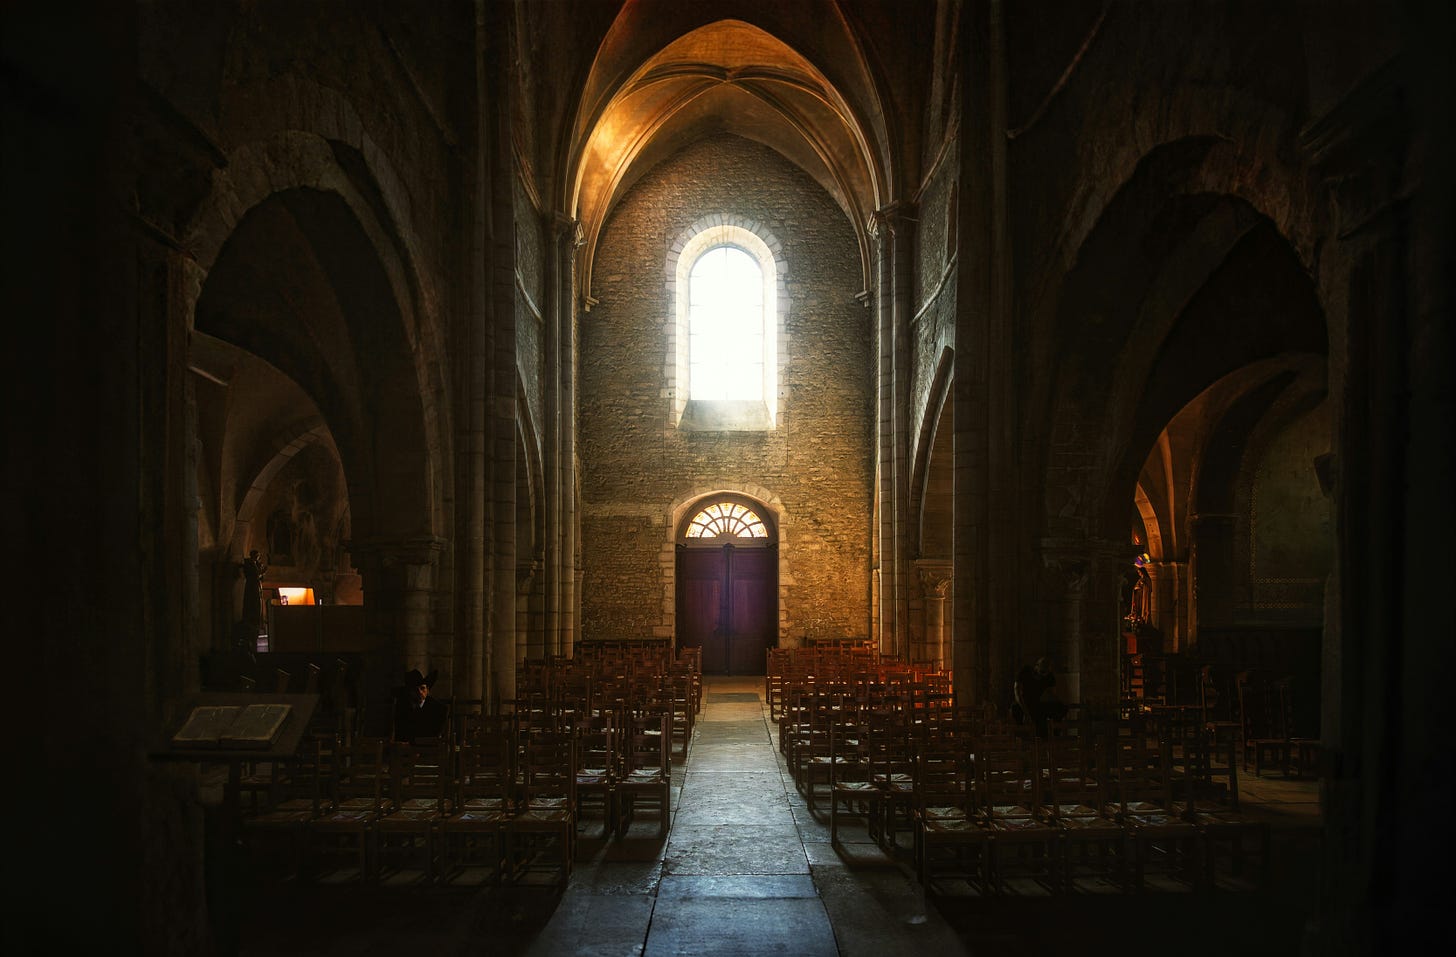 Image of the interior of an old high-ceiling church.